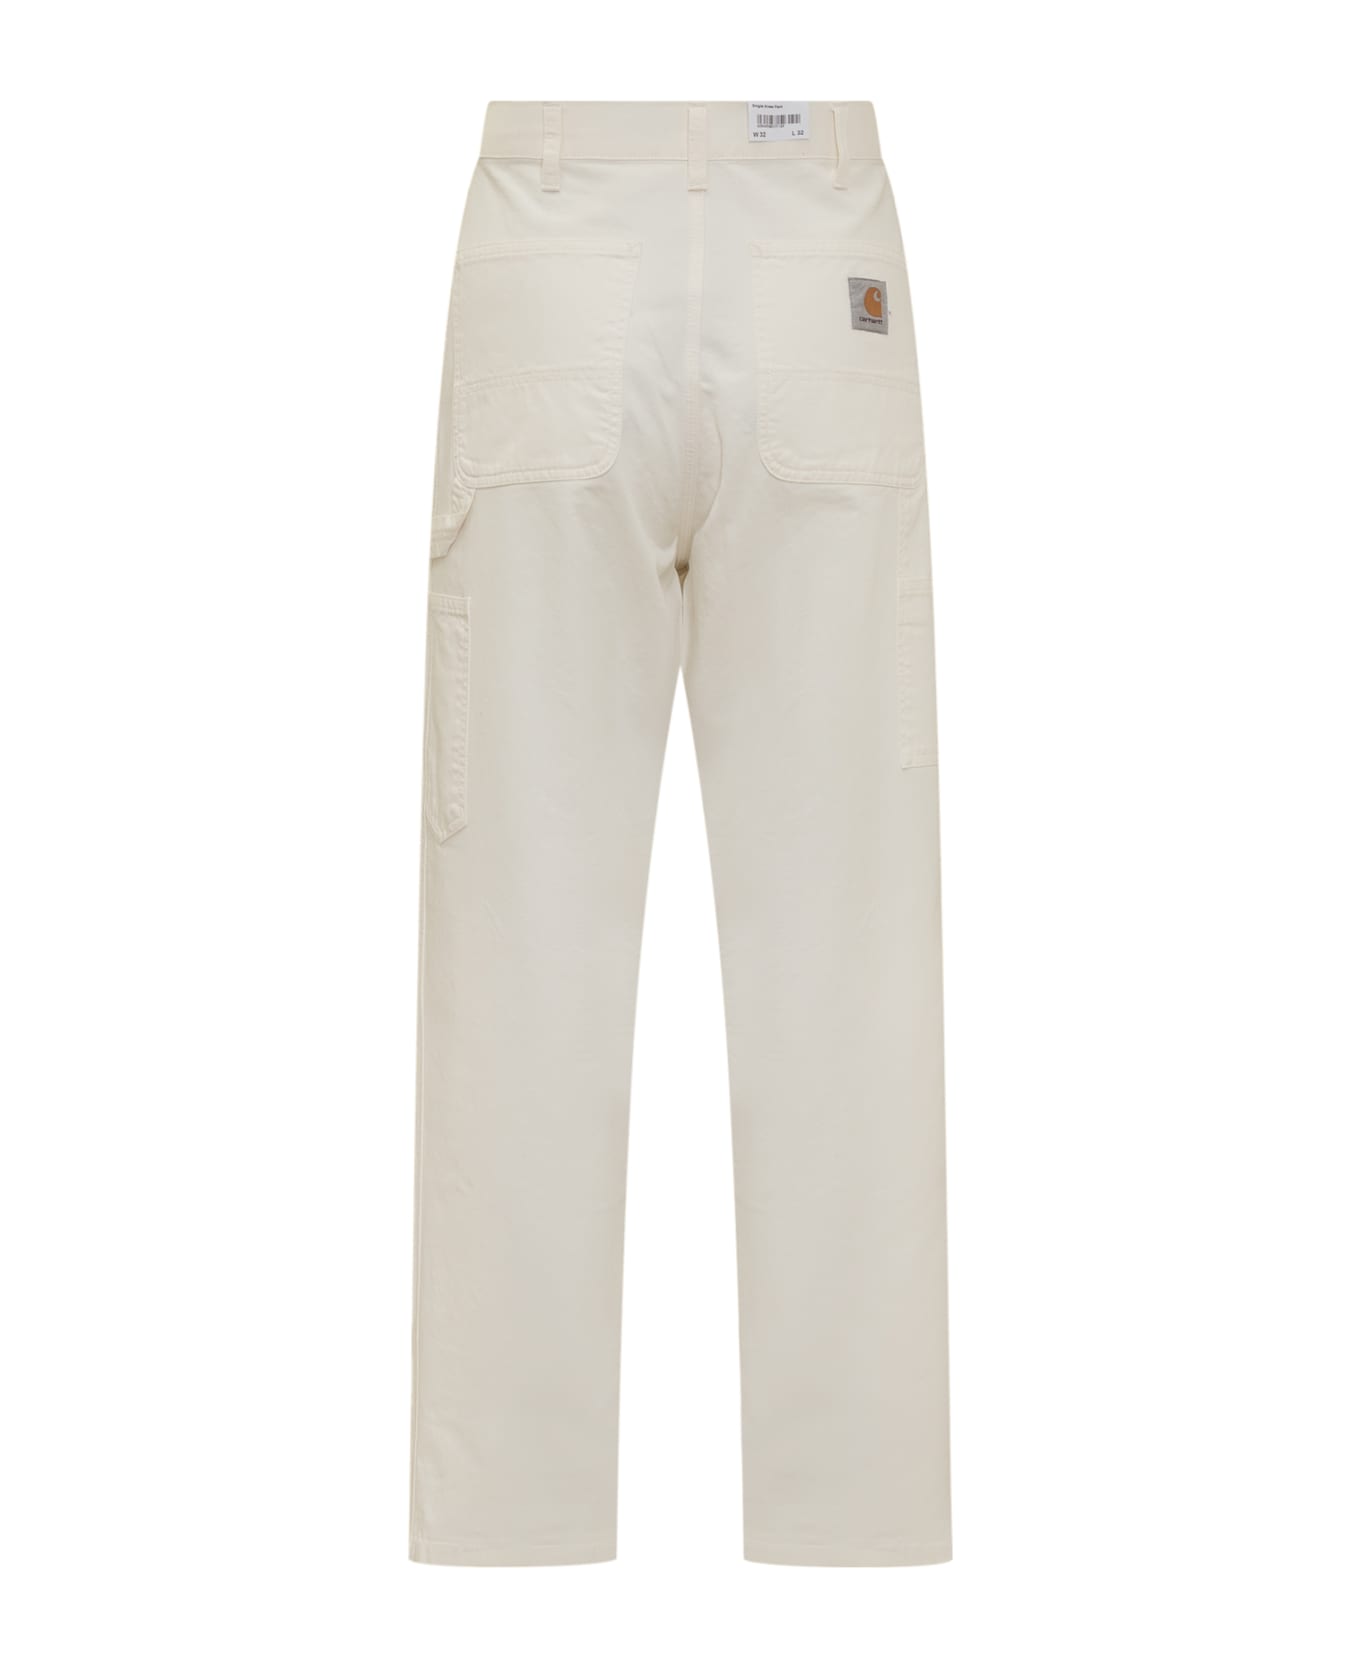 Carhartt Trousers - Off White ボトムス